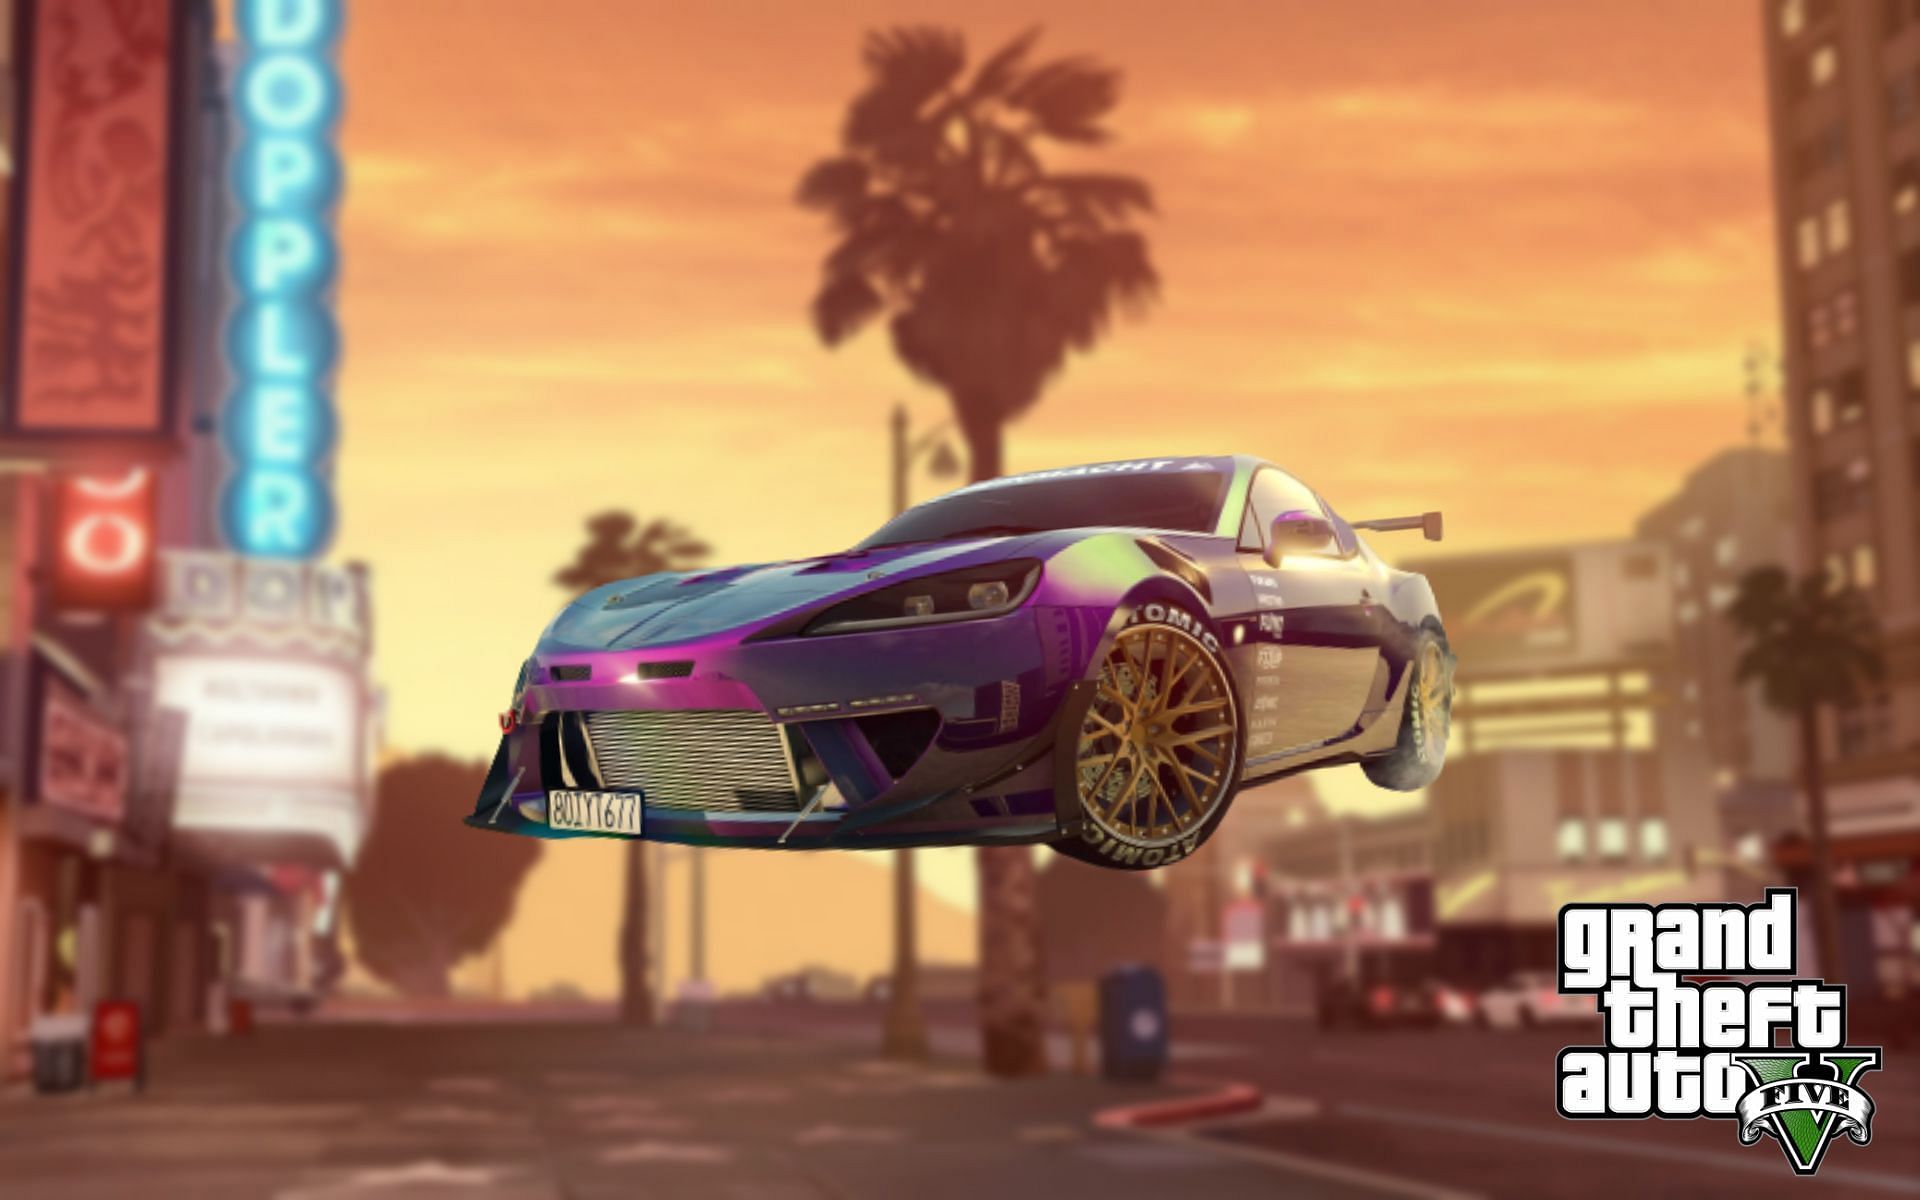 Hao&#039;s Special Works has to be unlocked first in the new GTA 5 (Image via Sportskeeda)